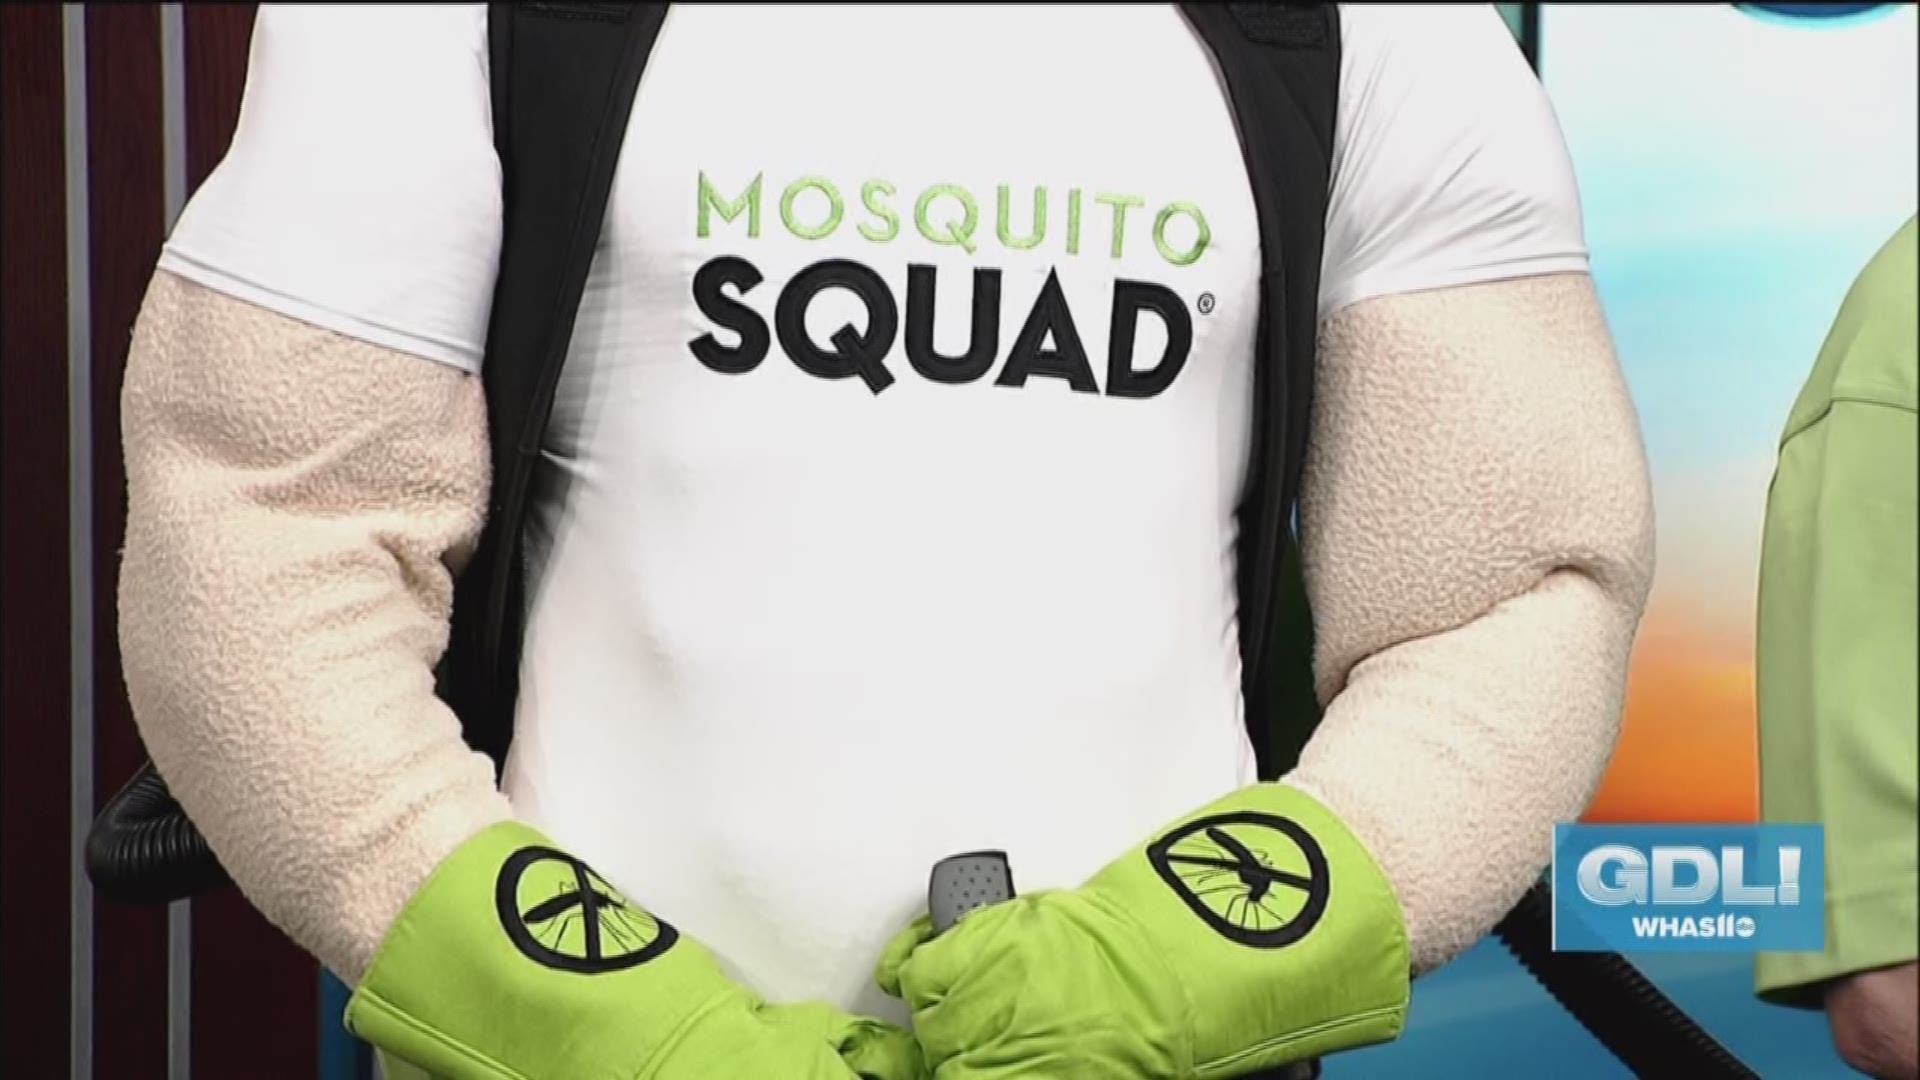 To get in touch with the Mosquito Squad, call 502-315-9097 or visit MosquitoSquad.com.